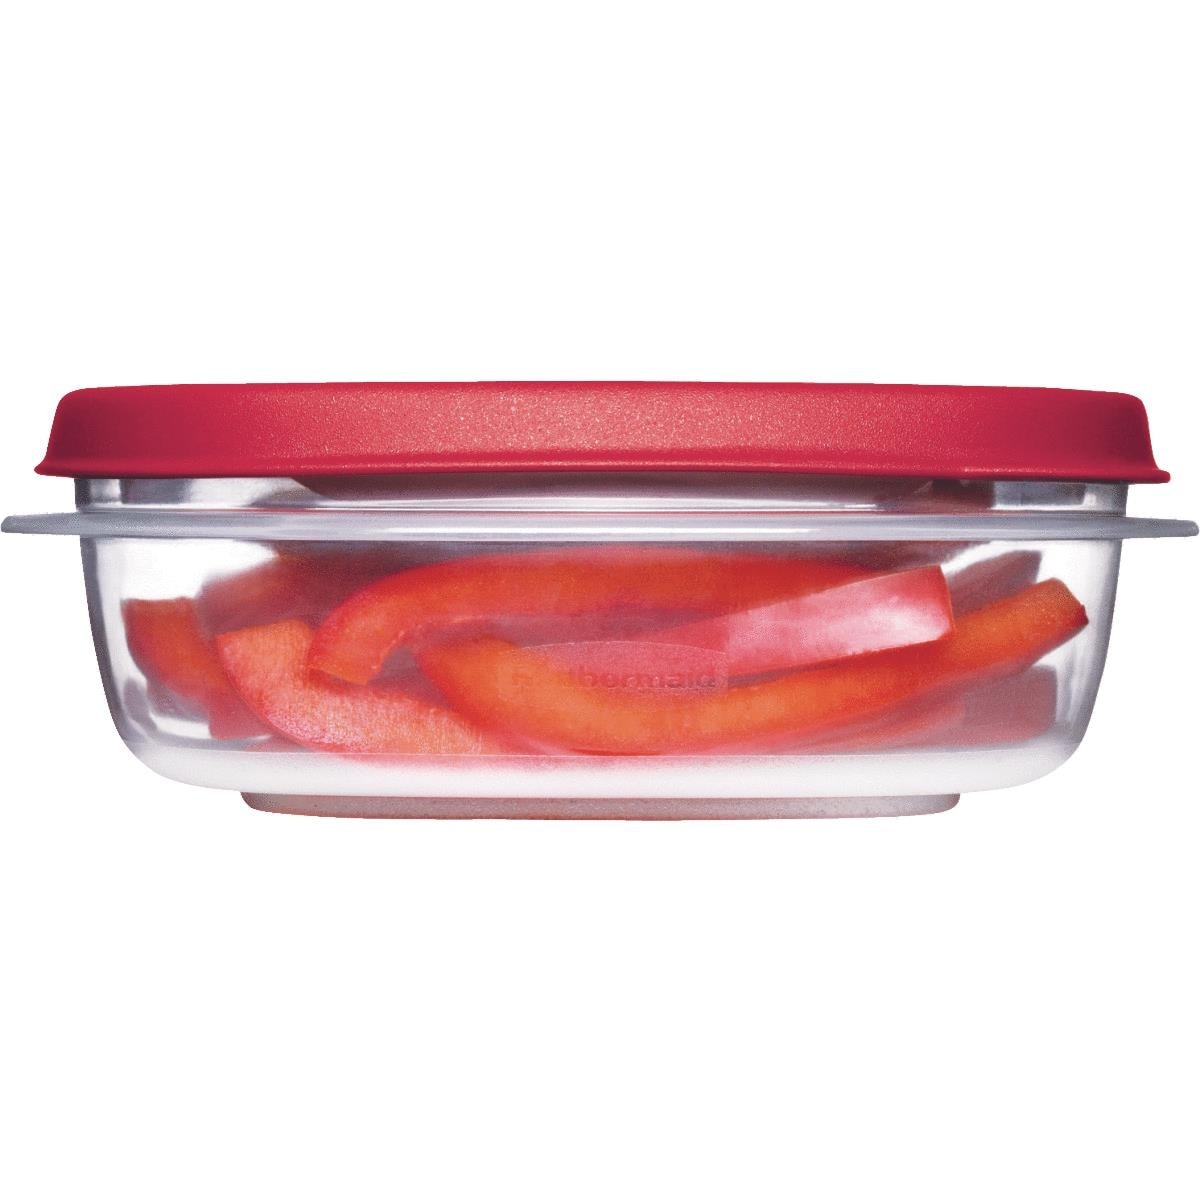 Rubbermaid Easy Find Lids 3-Cup Food Storage and Organization Container,  Racer Red